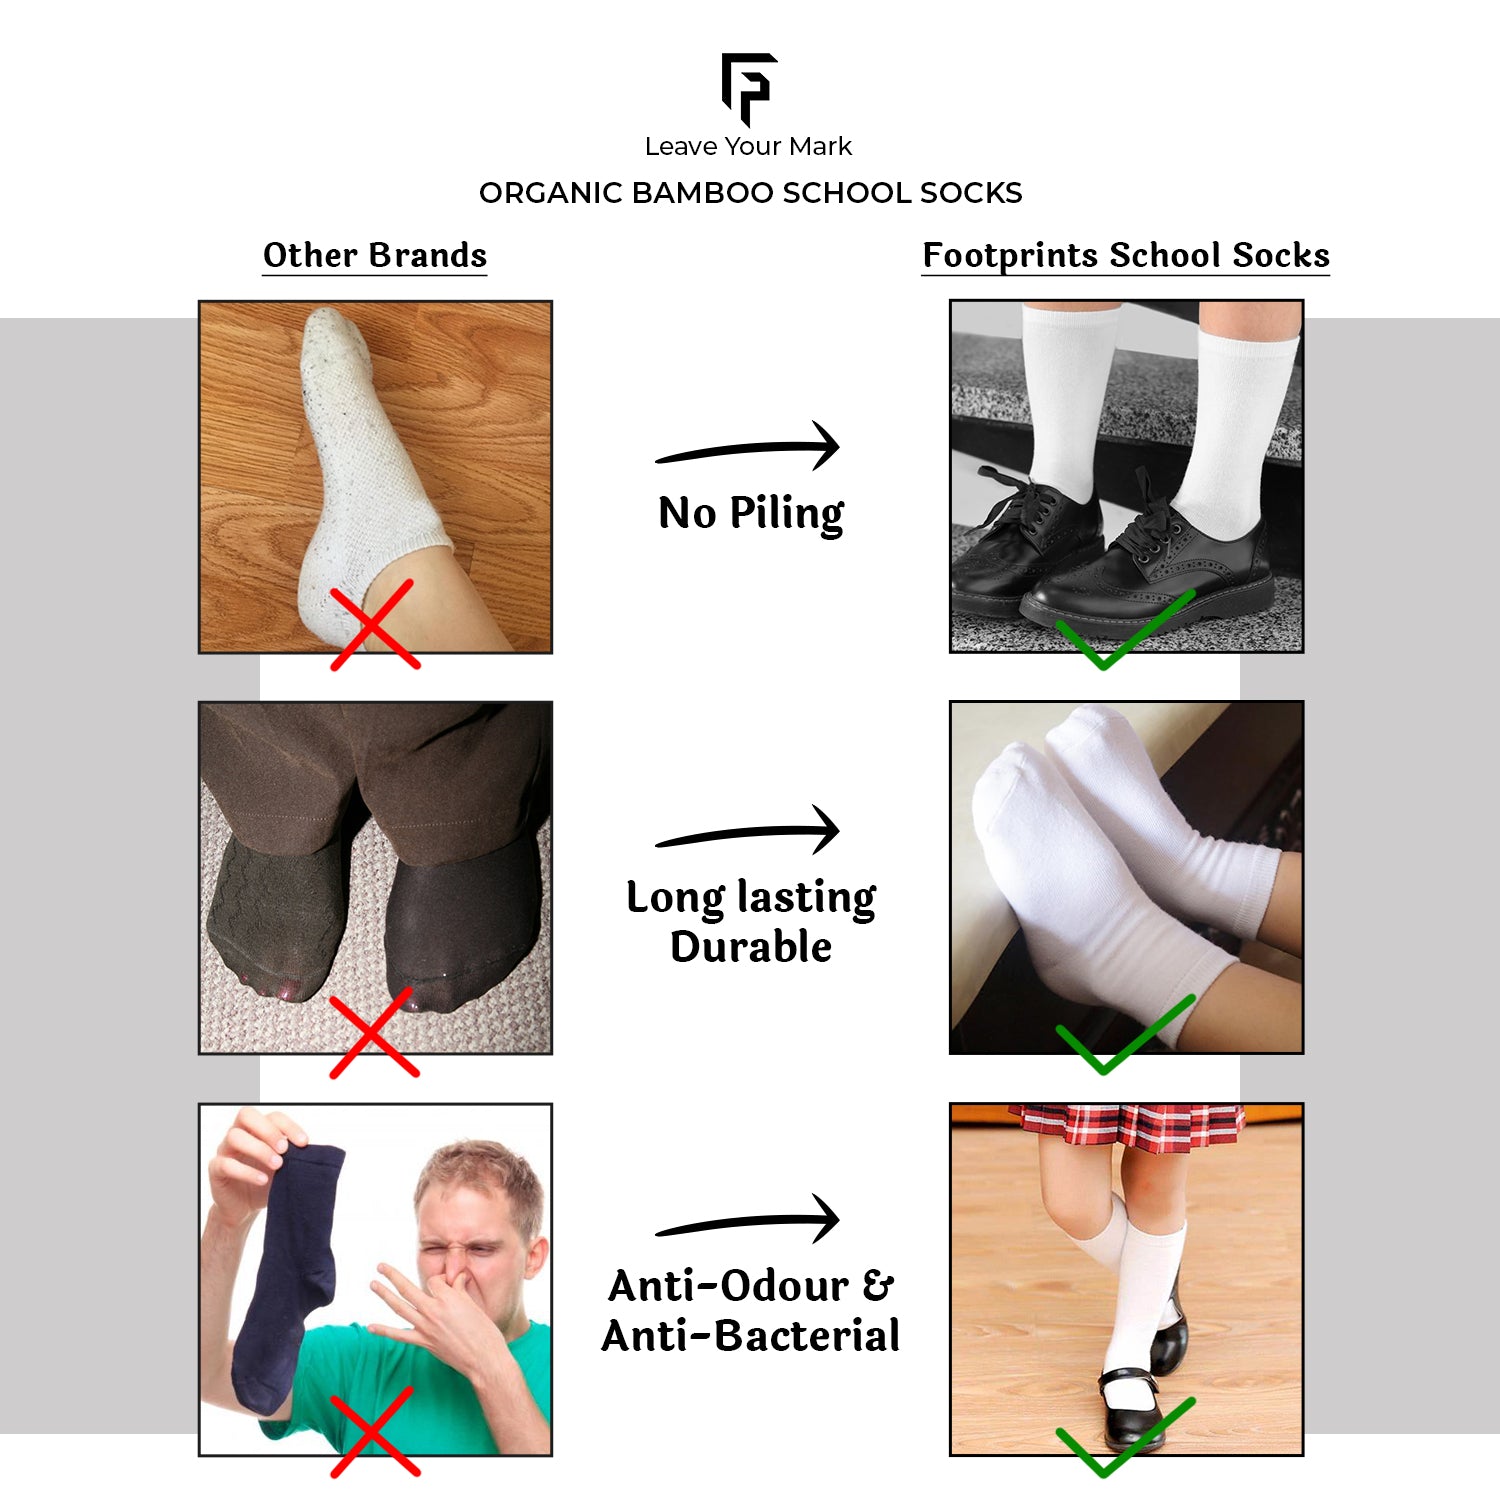 Kids Organic Cotton School Socks - Unisex - Calf length- Pack of 3 (Black)- Extra soft and Breathable